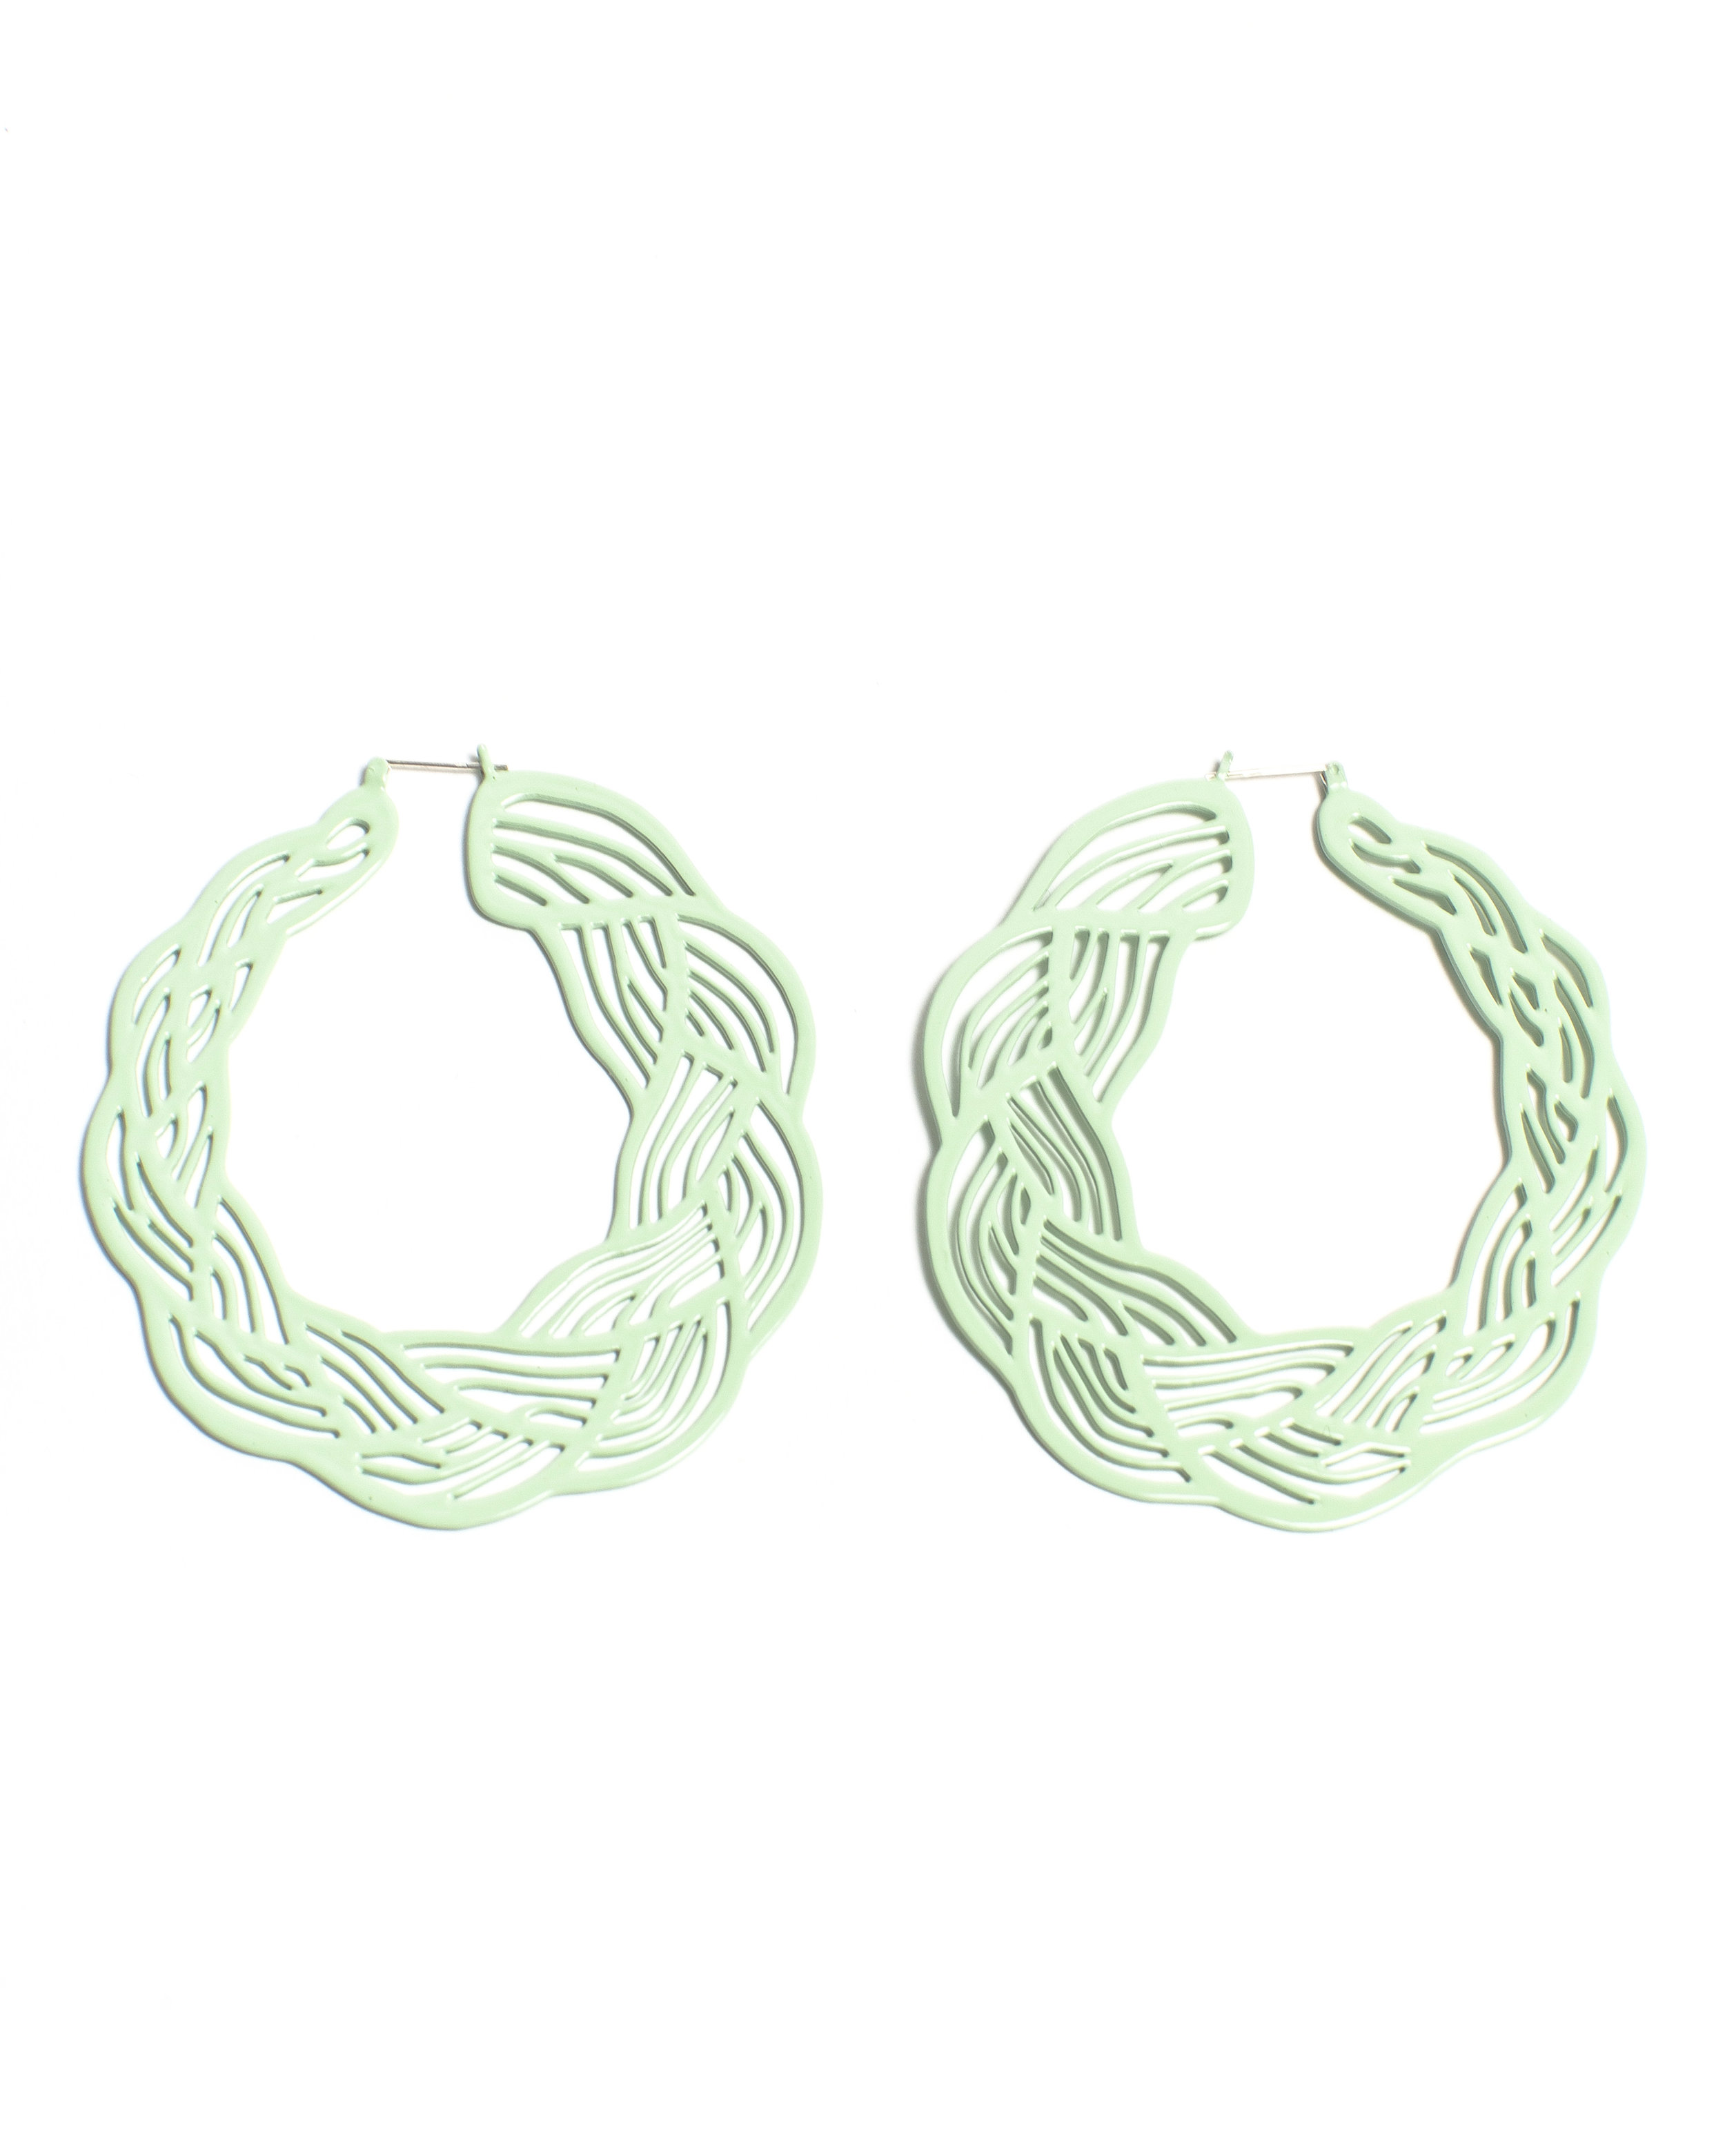   Pastel Braid Hoops   Powder-Coated Brass, Sterling Silver  3”x3”x.25”  (Mint Green, Pastel Purple, Pastel Pink)    Photo by Harry Gould Harvey 